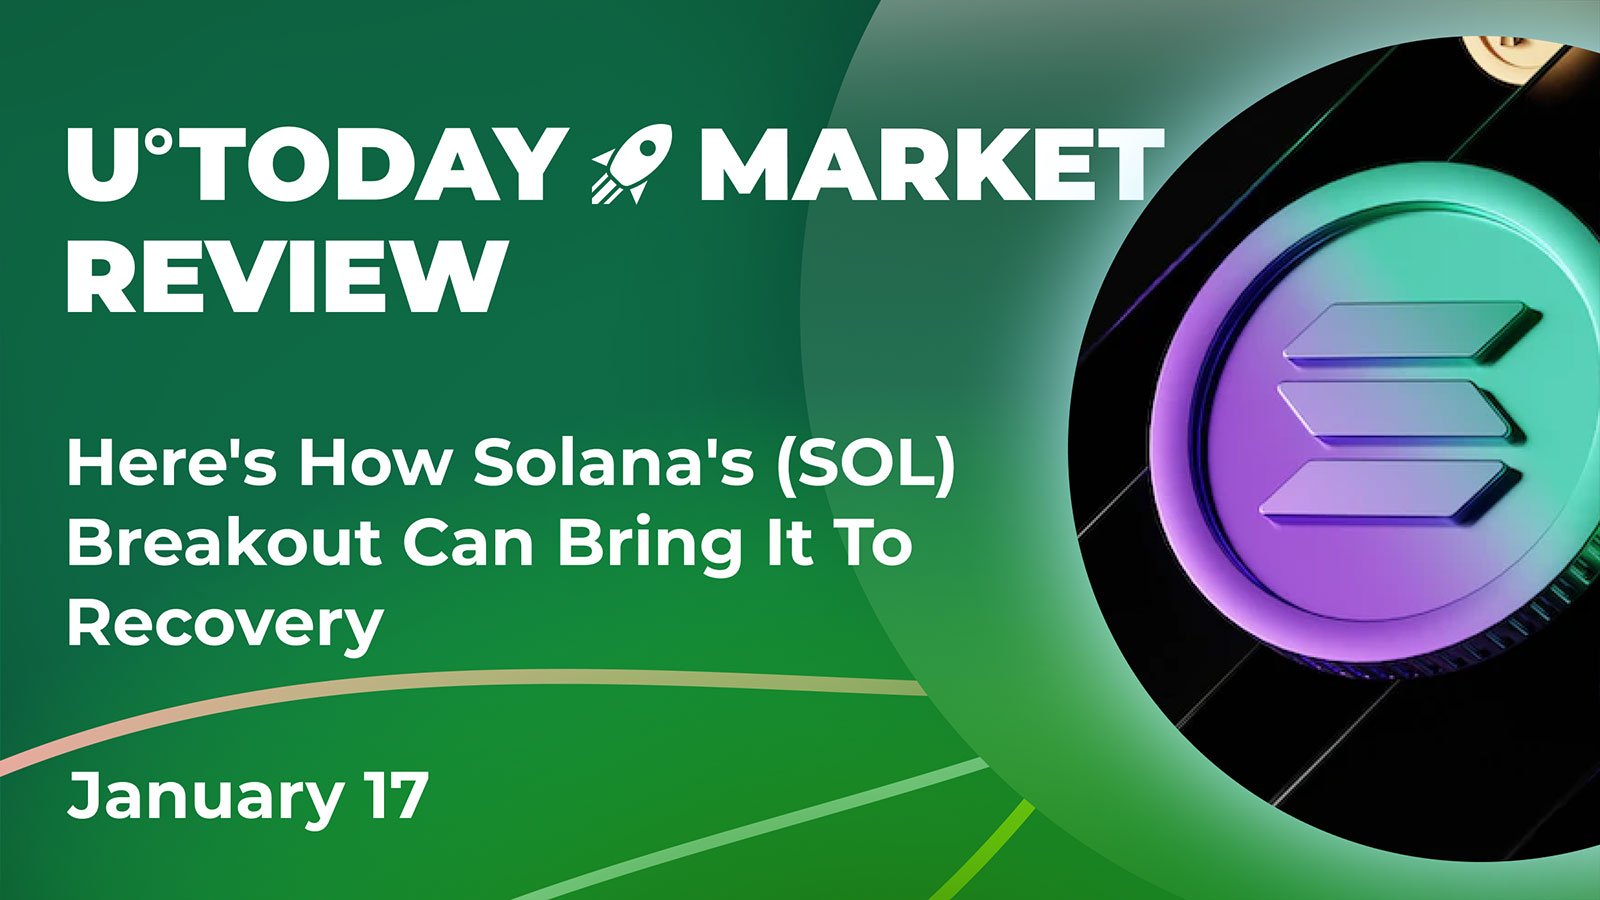 Here's How Solana's (SOL) Breakout Can Bring It to Recovery: Crypto Market Review, Jan. 17 